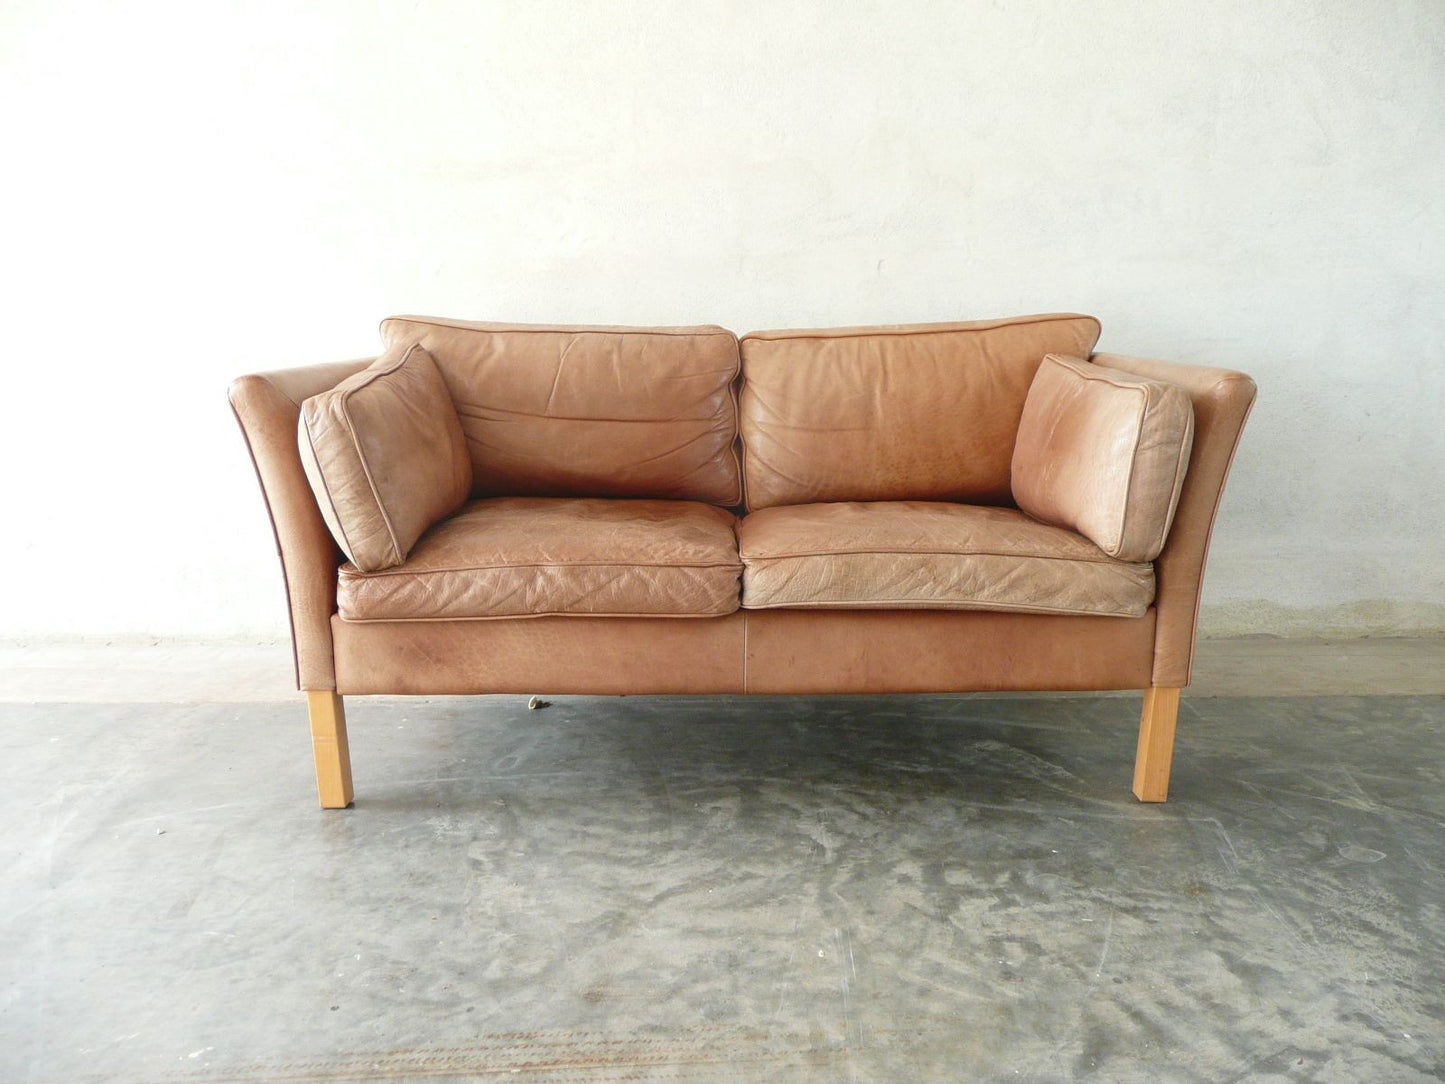 Tanned leather two seat sofa